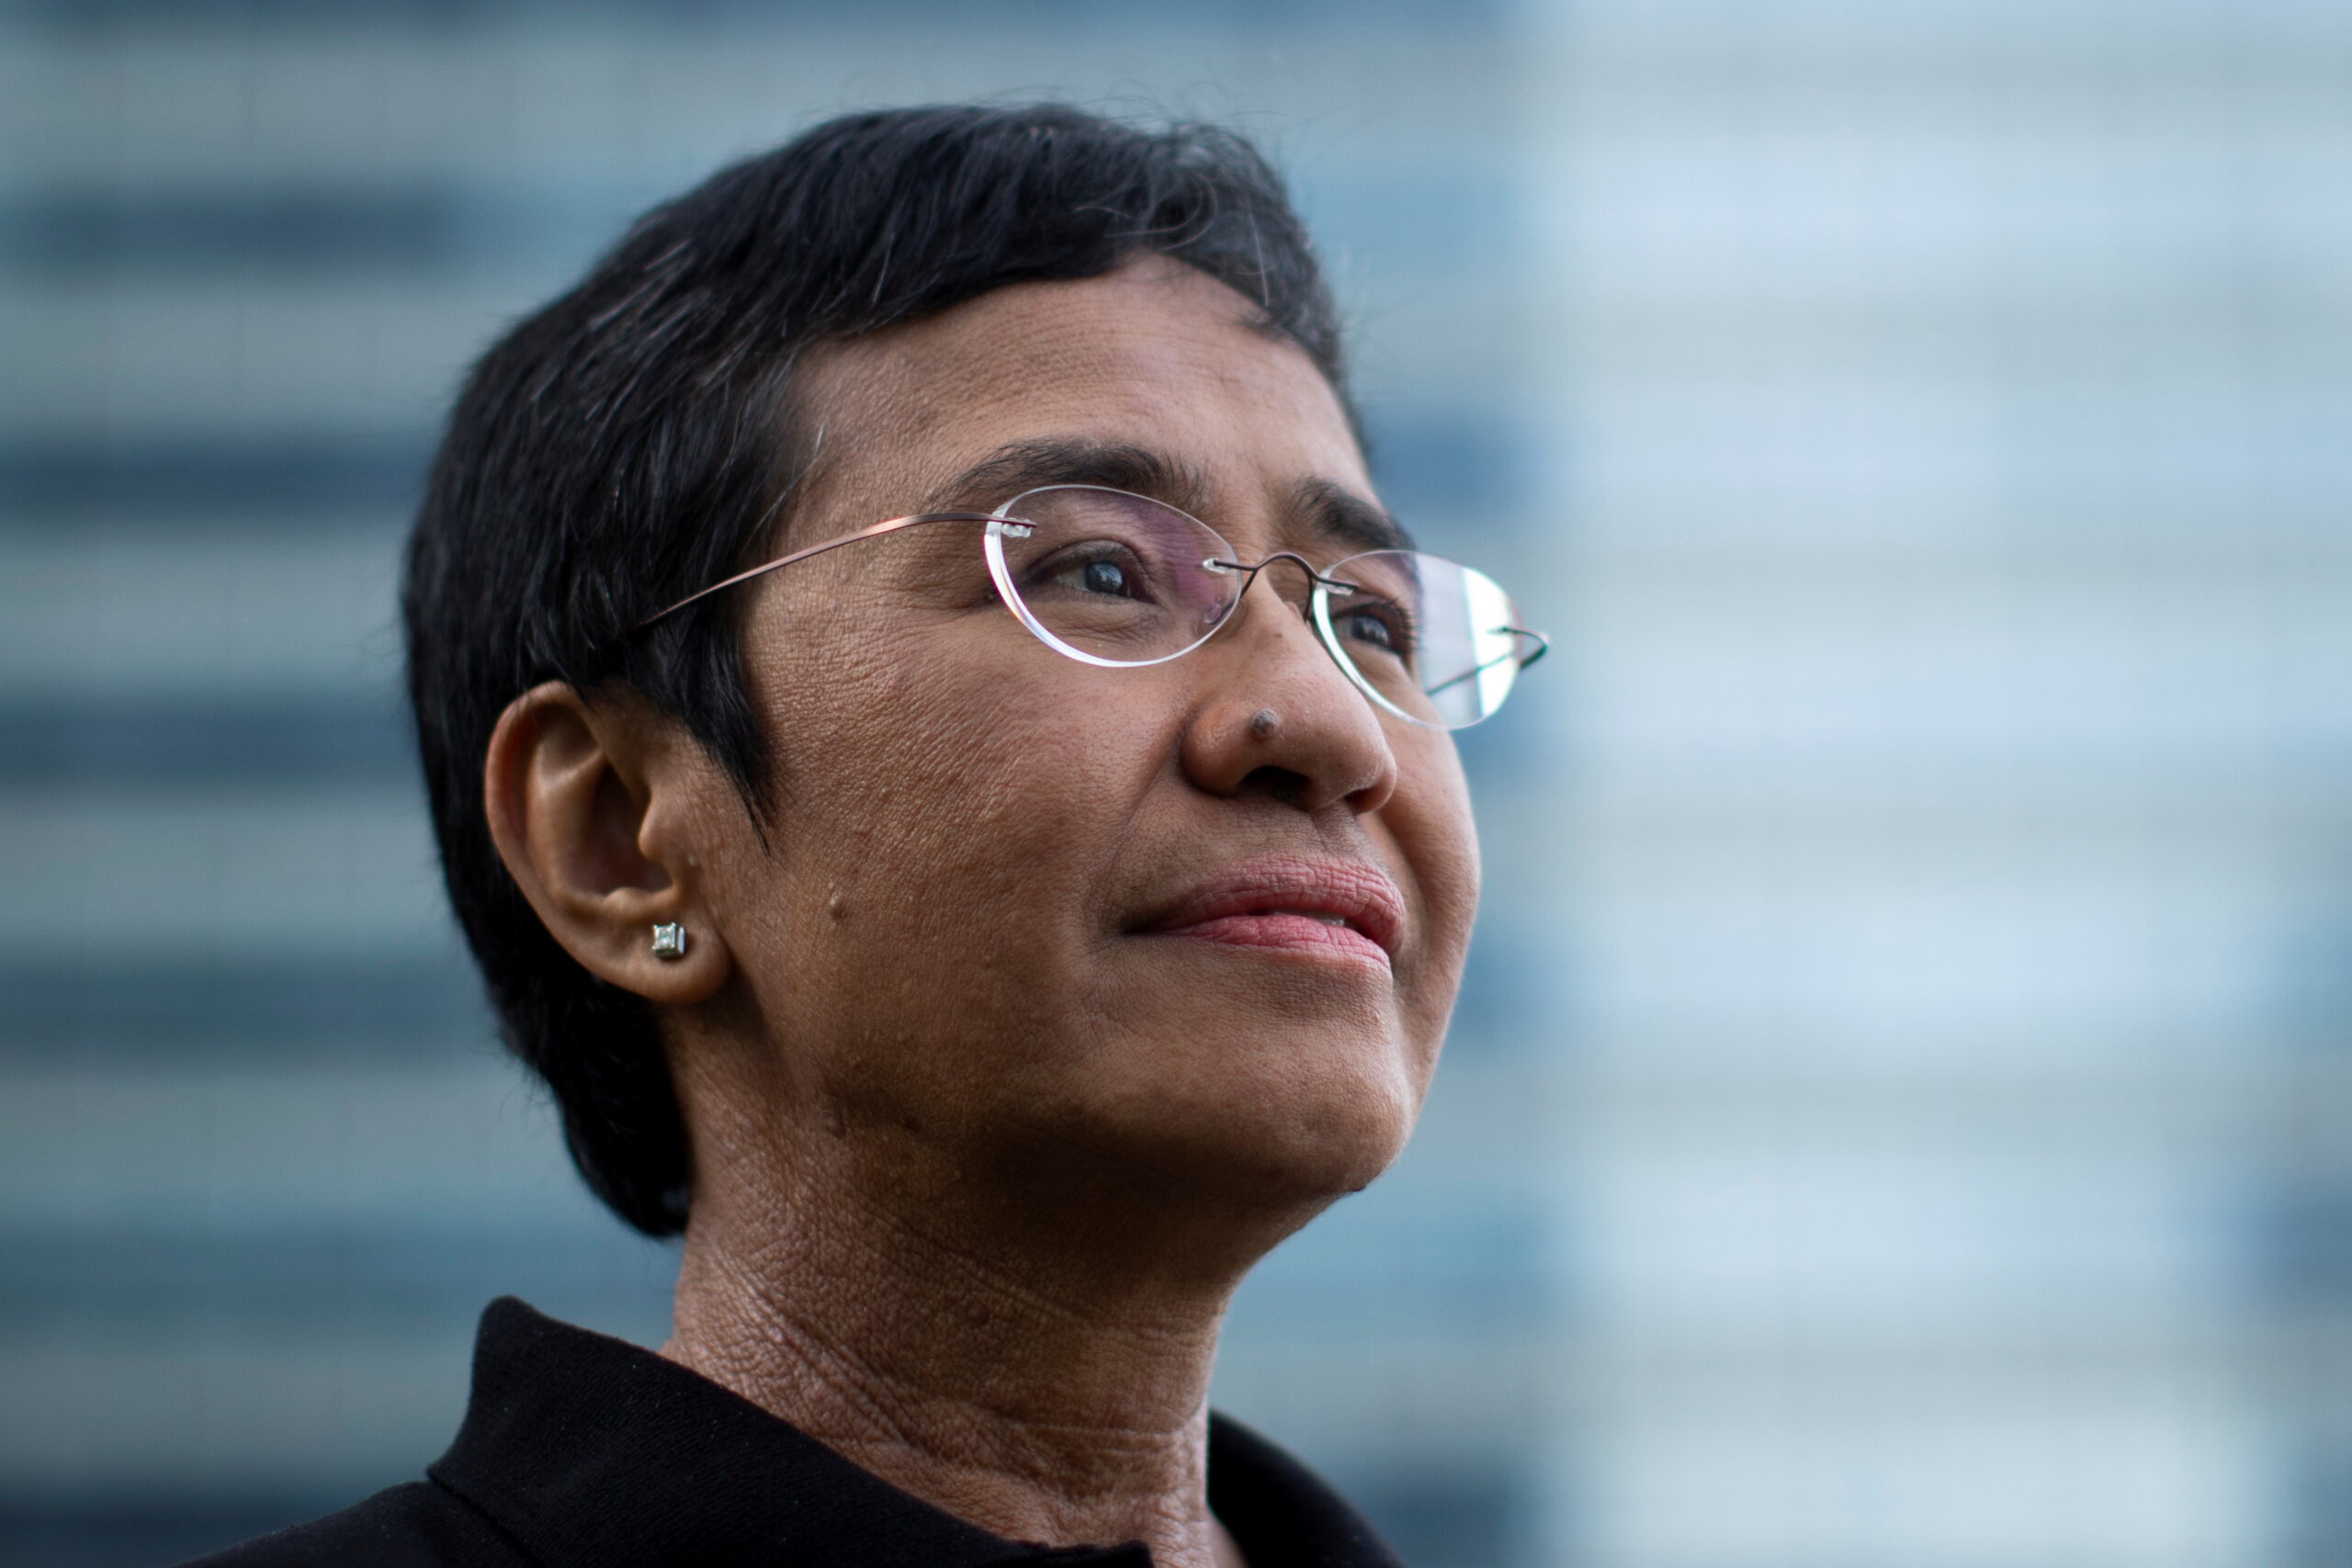 Filipino journalist and Rappler CEO Maria Ressa, one of 2021 Nobel Peace Prize winners, poses for a portrait in Taguig City, Metro Manila, Philippines, October 9, 2021. Ressa was a keynote speaker at Nieman Foundation's 85th Anniversary and Reunion.